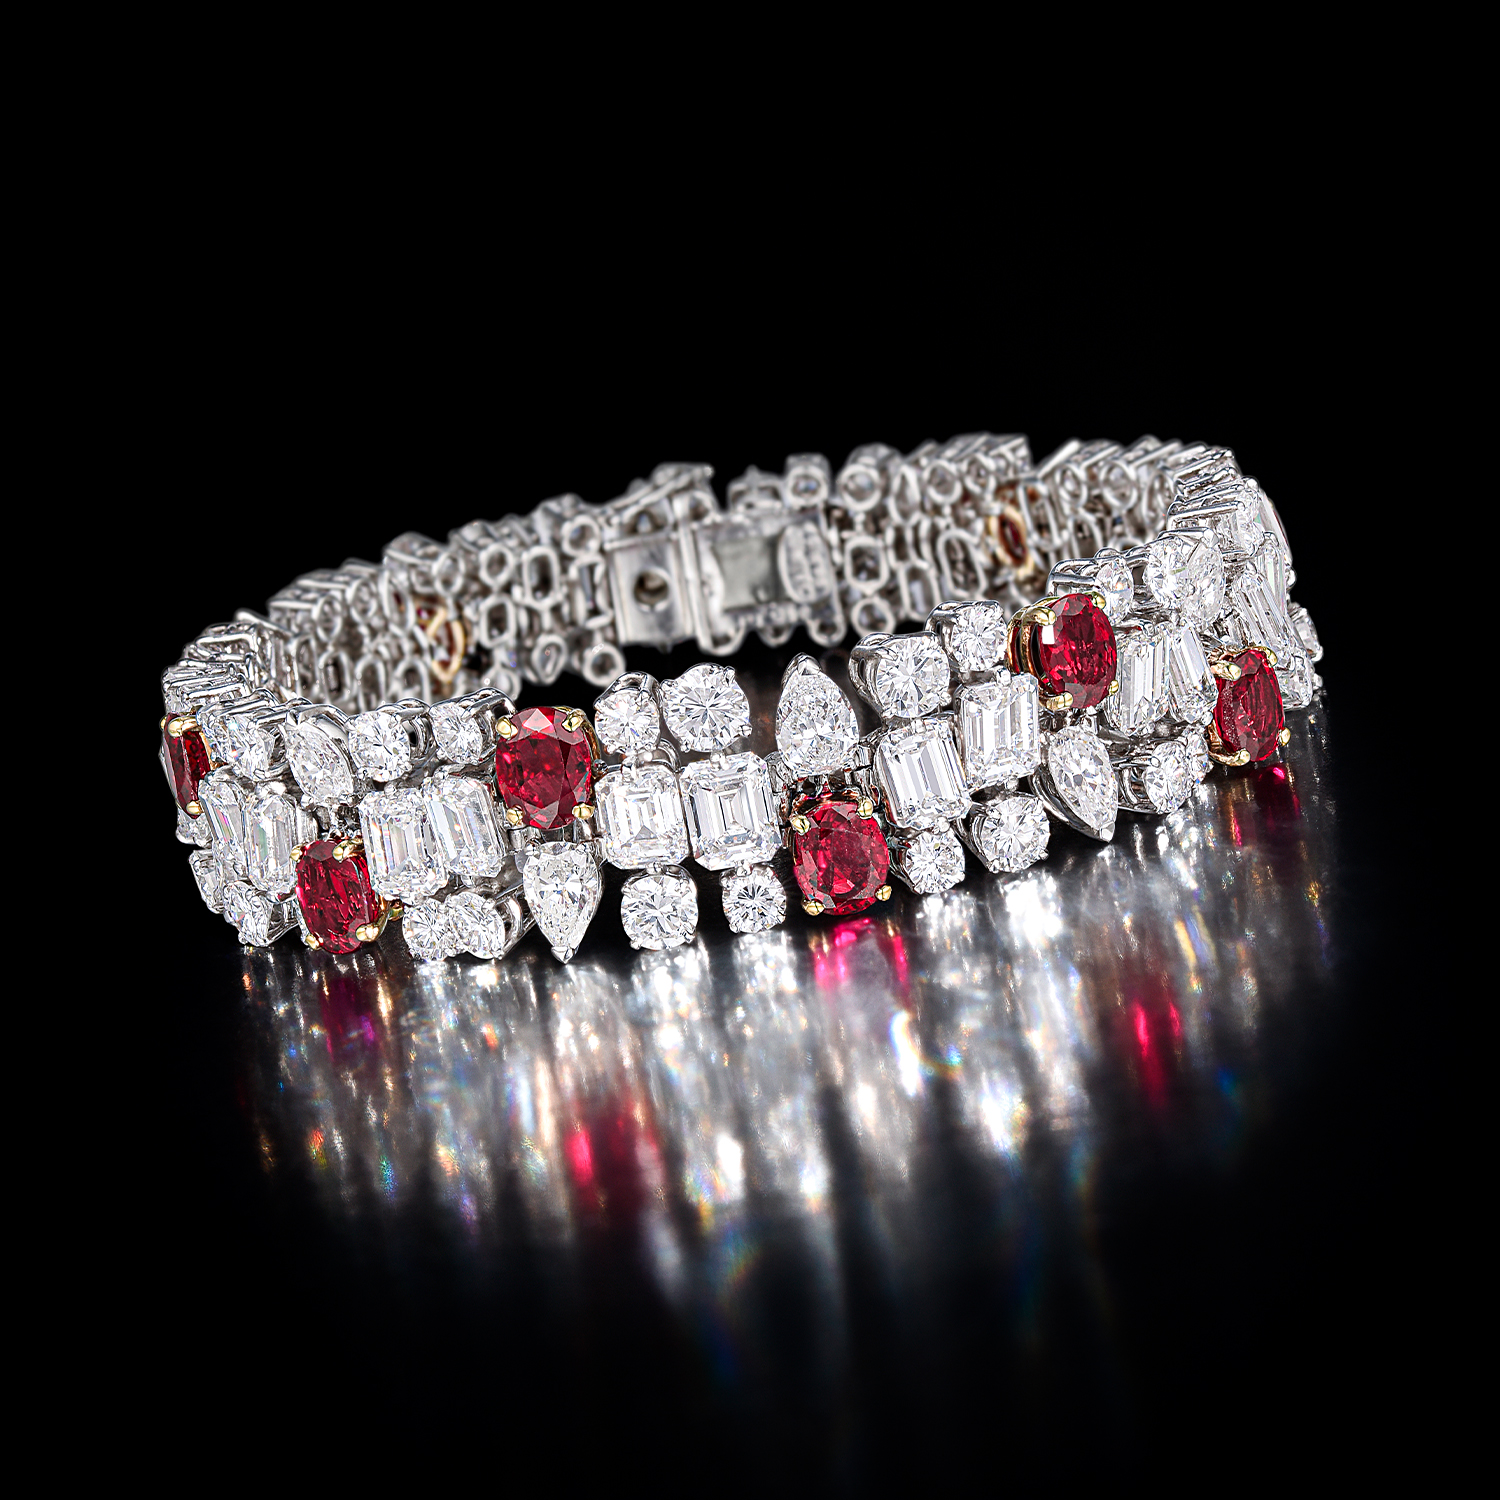 Bulgari, Cartier and Tiffany glitter among Trove's July 10 auction